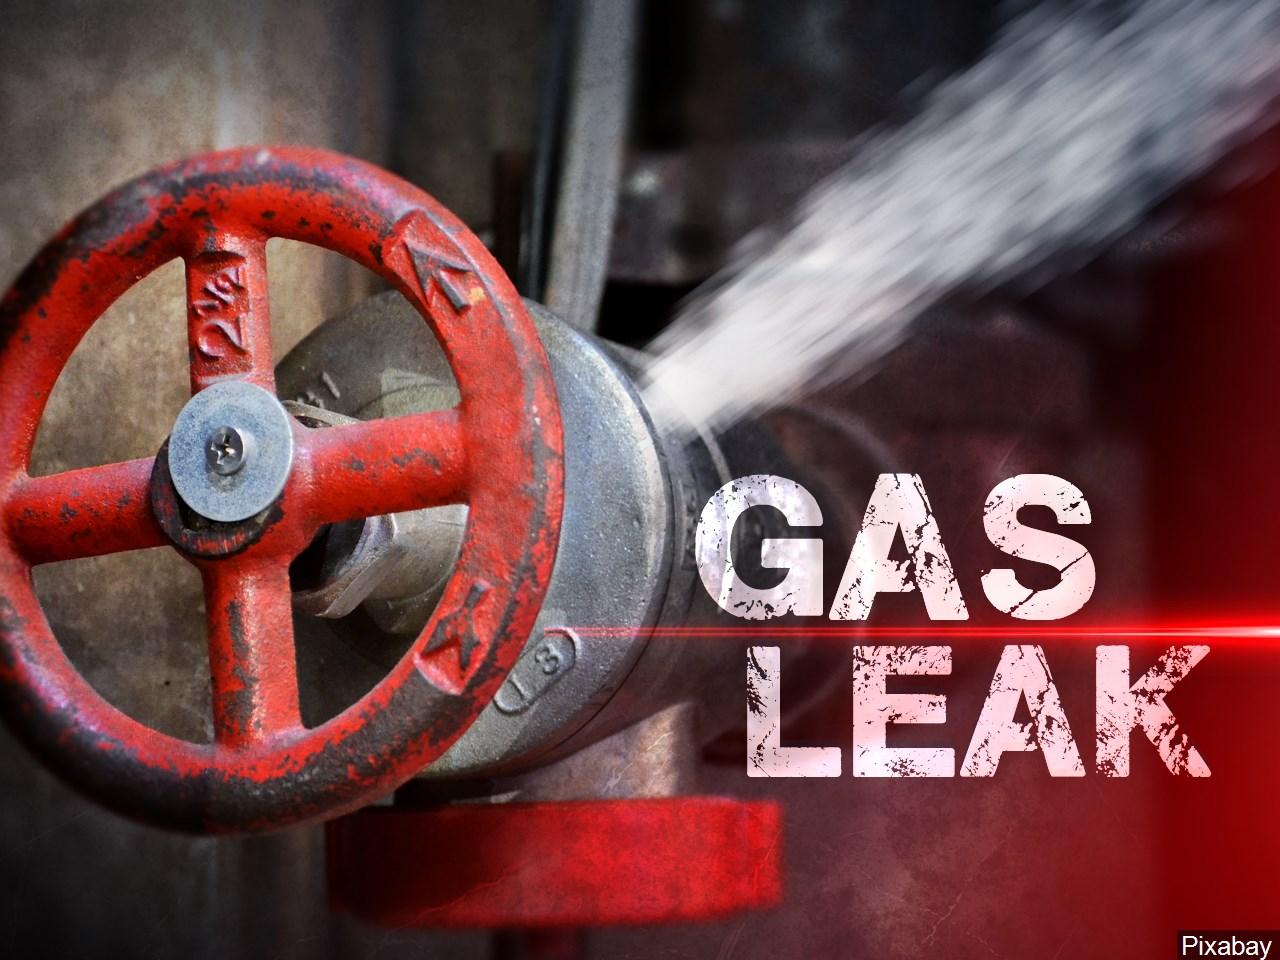 Natural gas line break in Moon Twp. prompts evacuation, outages RMU